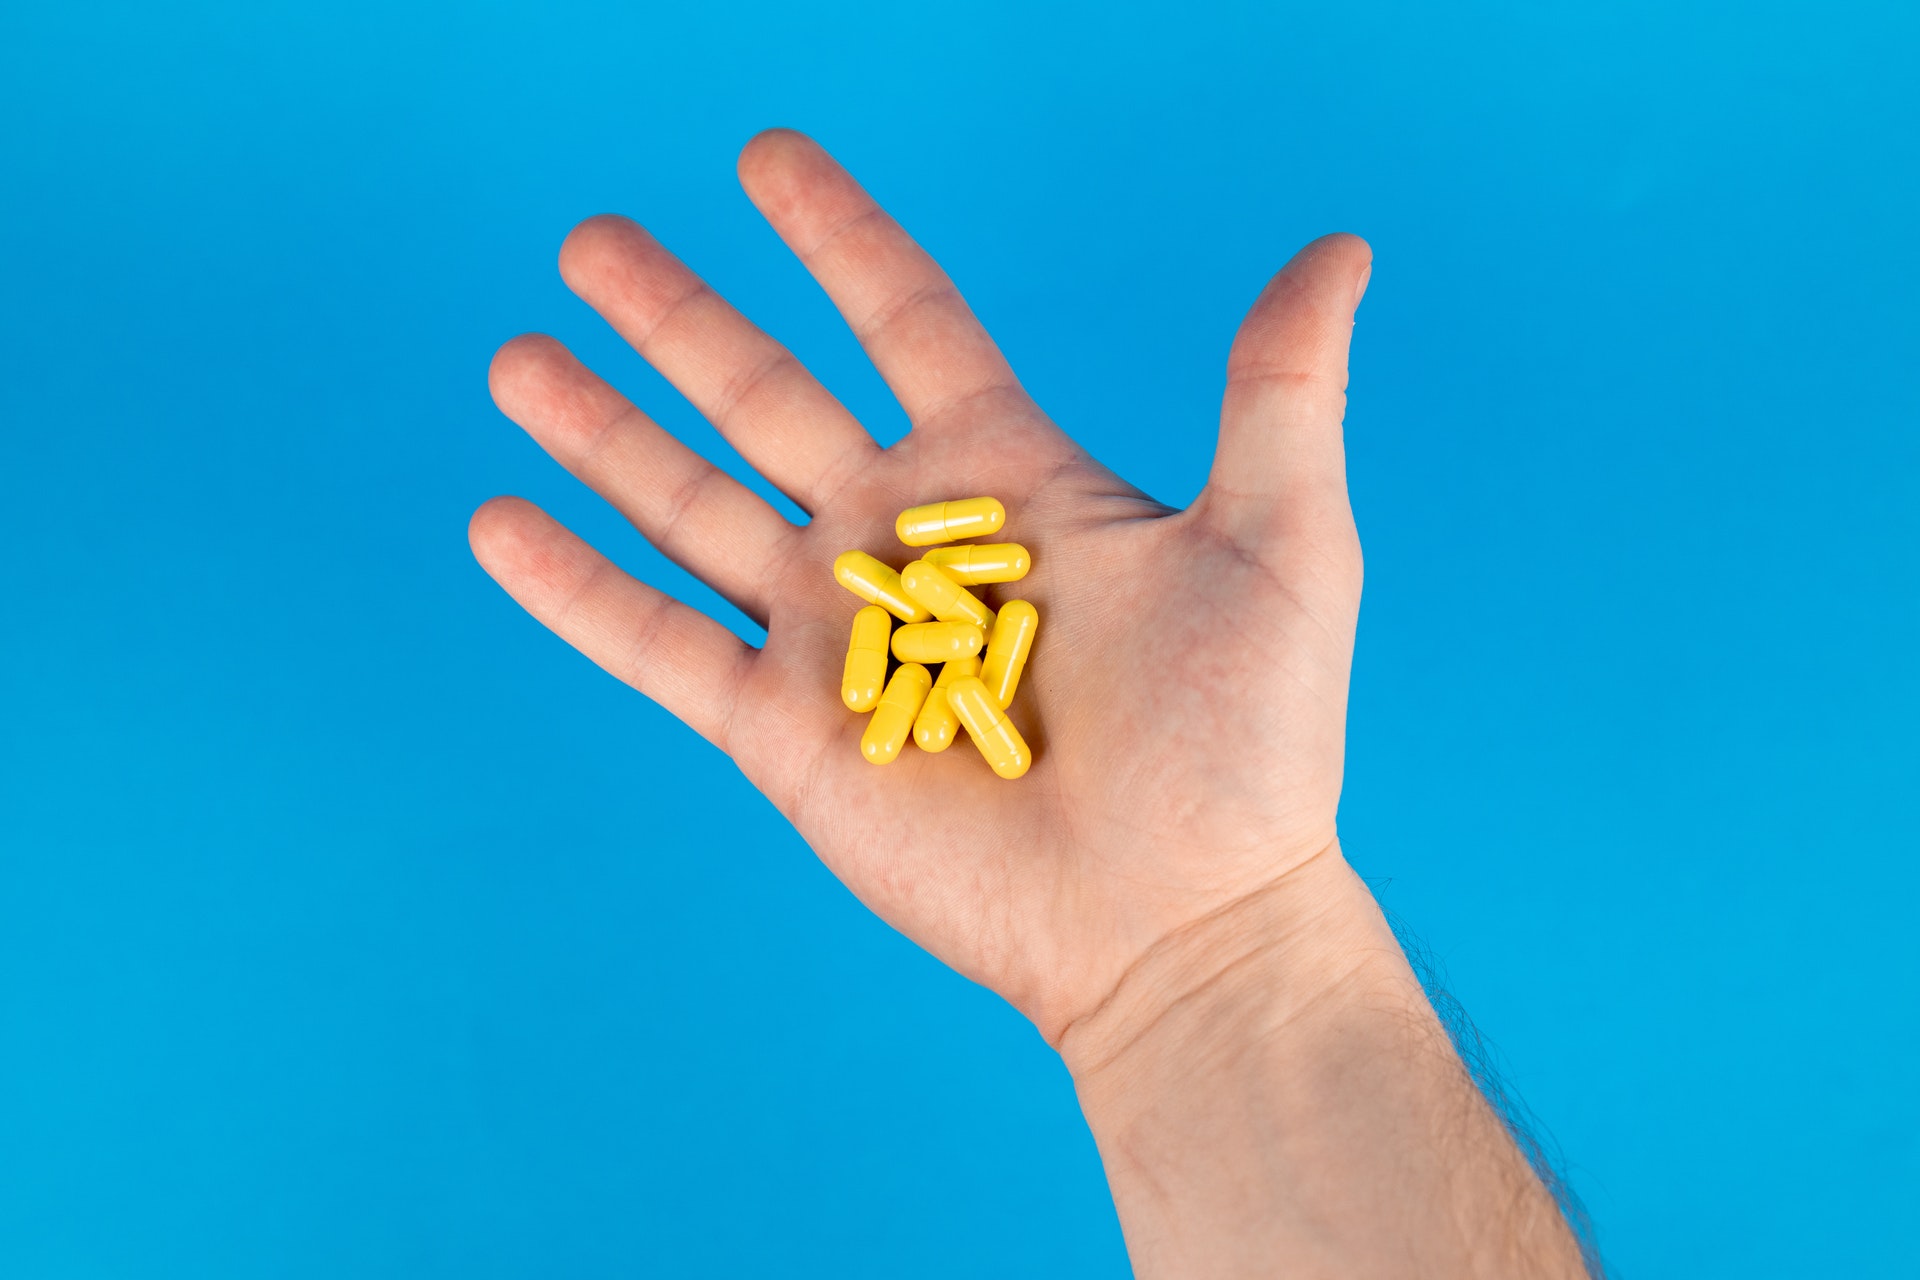 Do you need a daily multivitamin? Probably not, says national health task force.